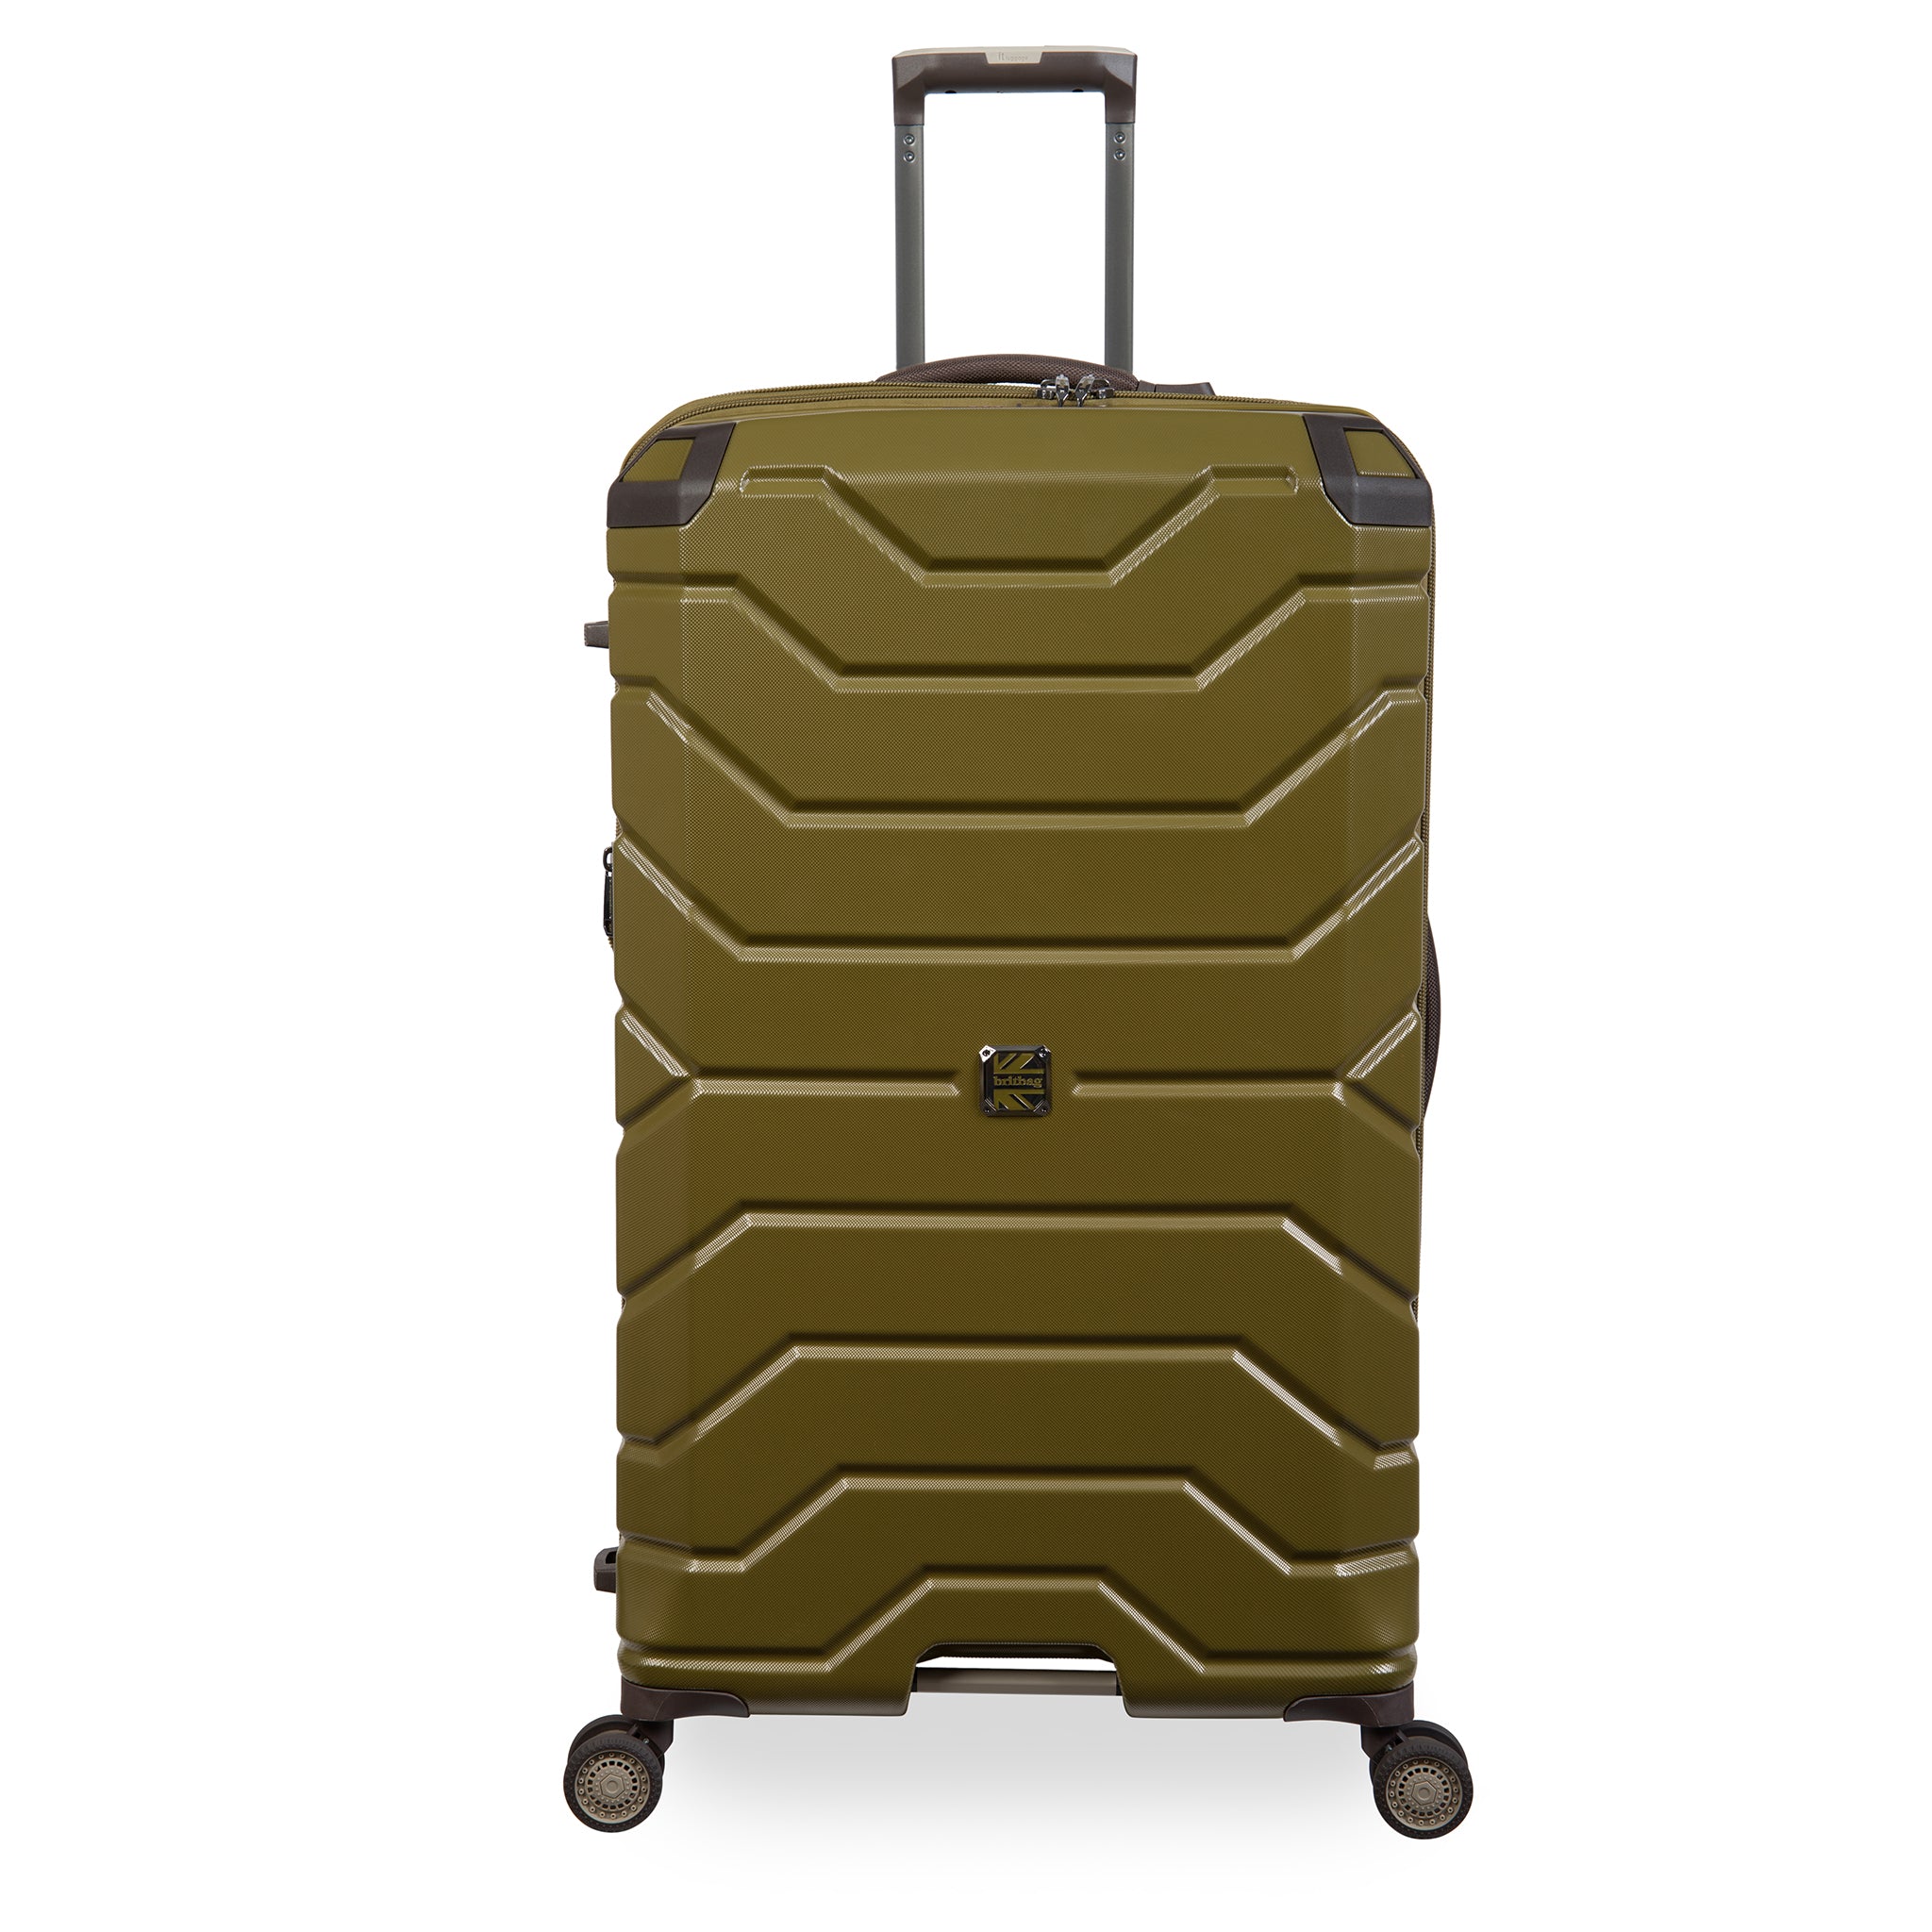 it Luggage | BRITBAG Galloway - Large in Olive Nut